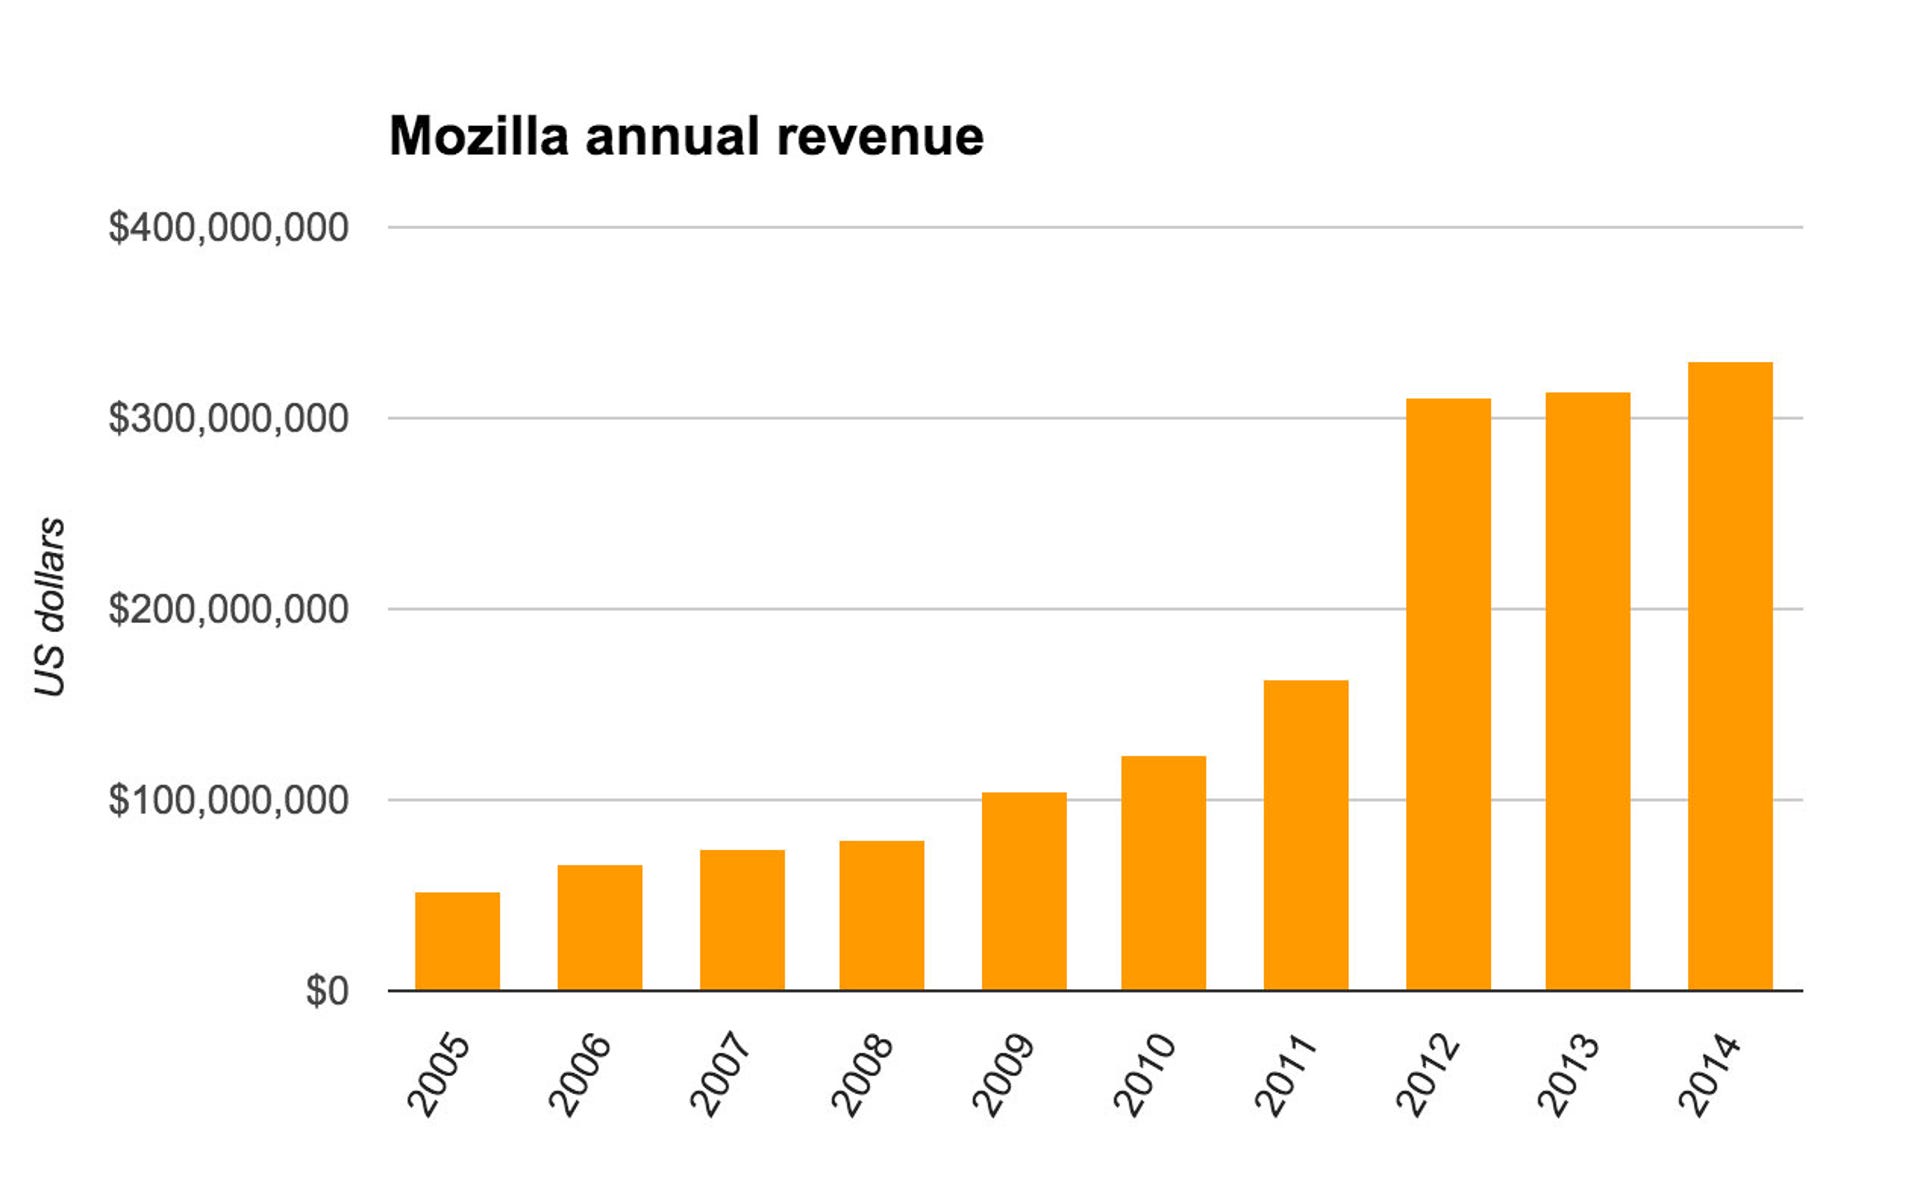 Mozilla's revenue has risen dramatically since the release of Firefox 1.0 in 2004.